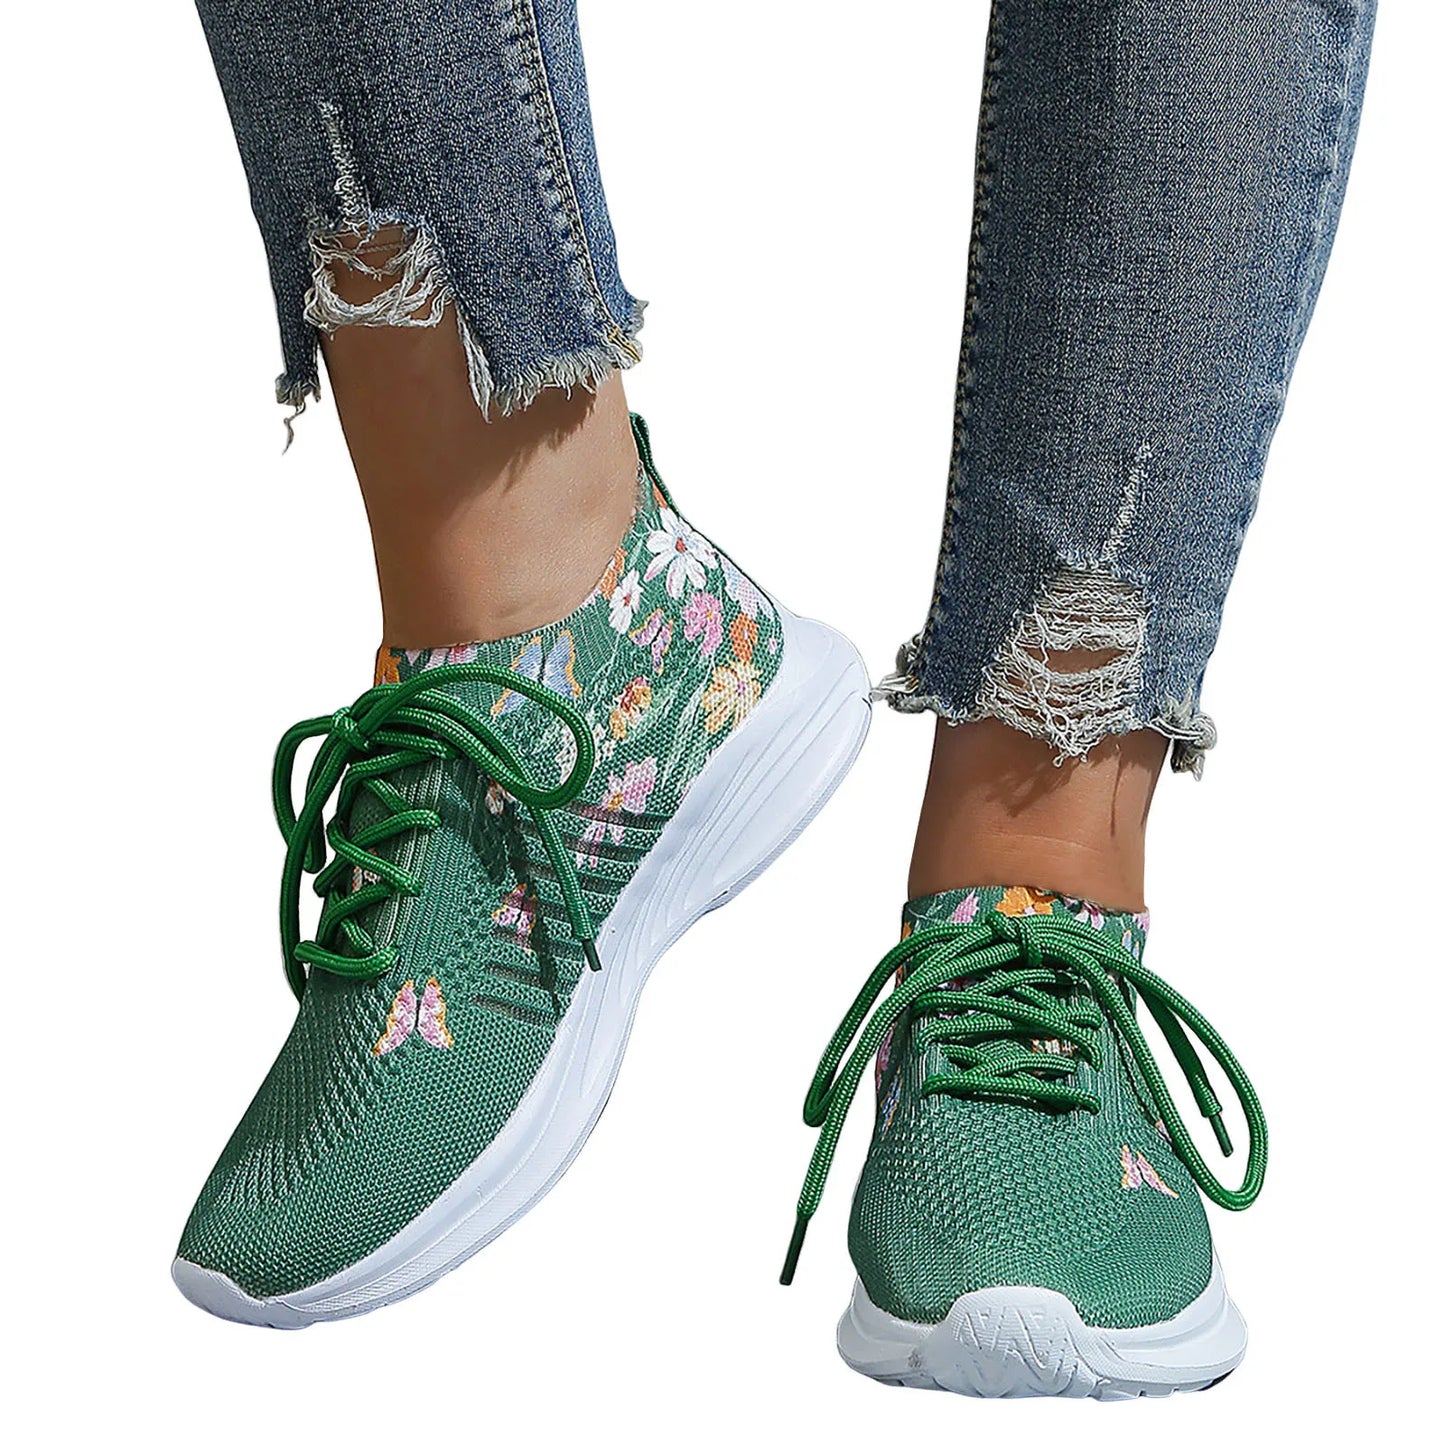 Women's Breathable Knitting Shoes New Flying Weaving Sneakers/Mesh Round Head Lace Up Soft Bottom